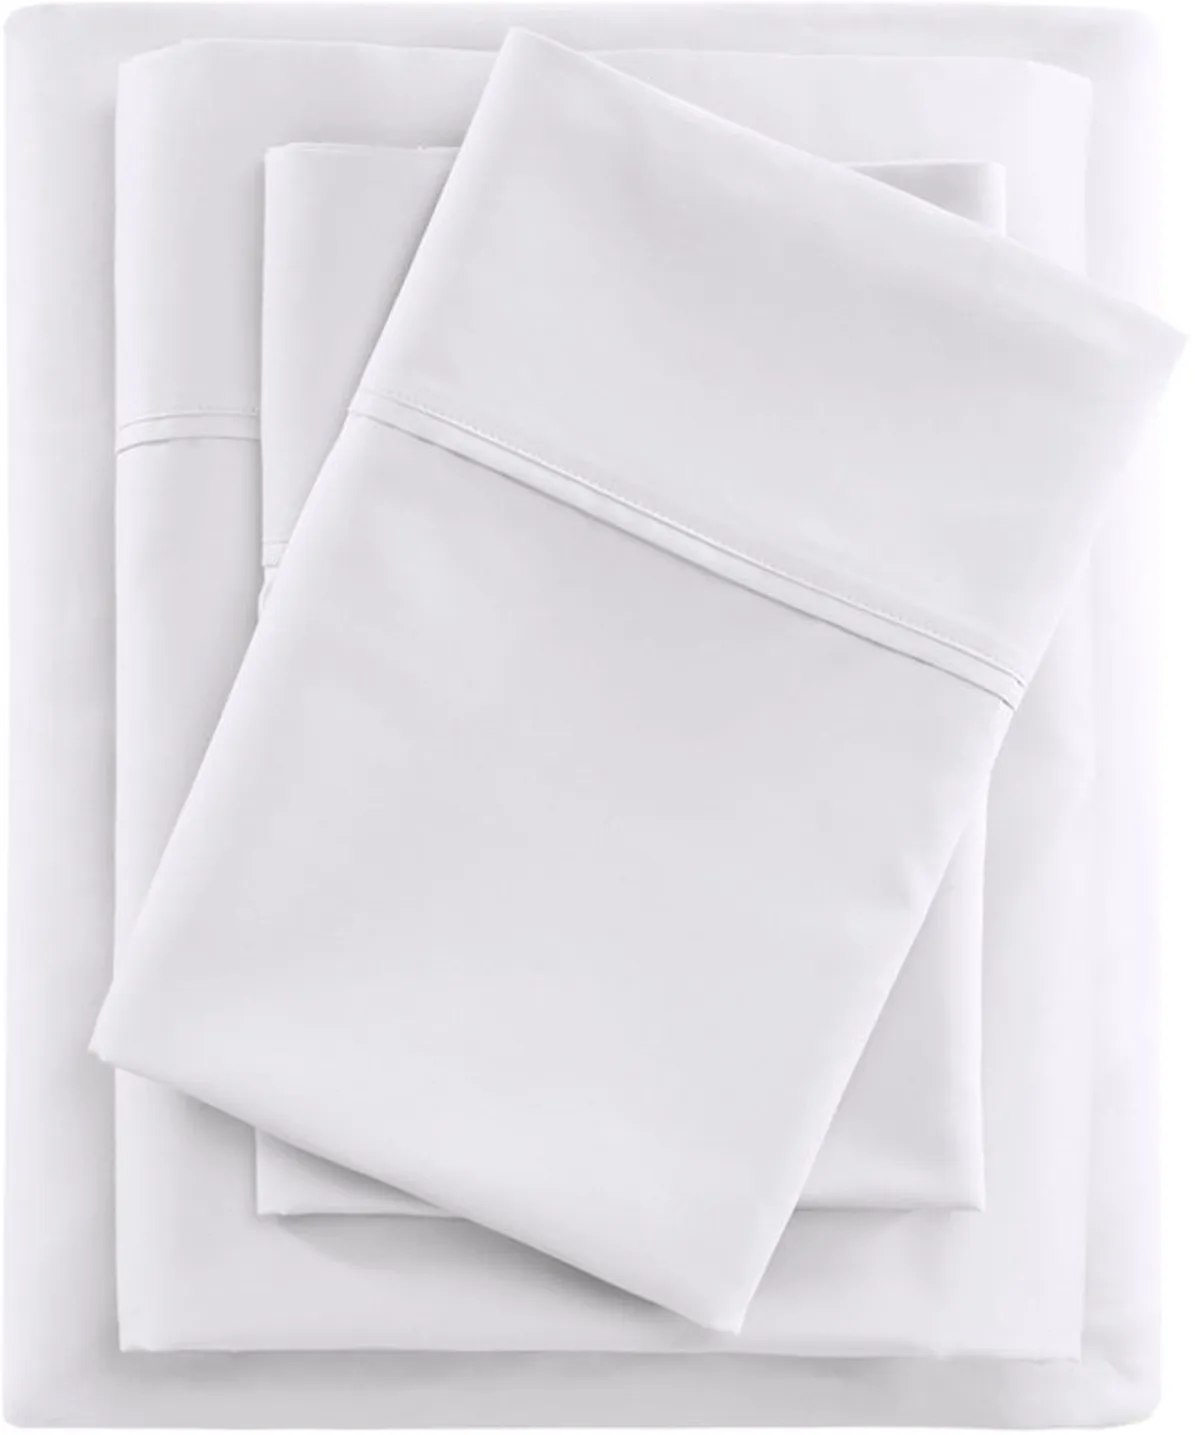 Olliix by Beautyrest White Full 600 Thread Count Cooling Cotton Rich Sheet Set